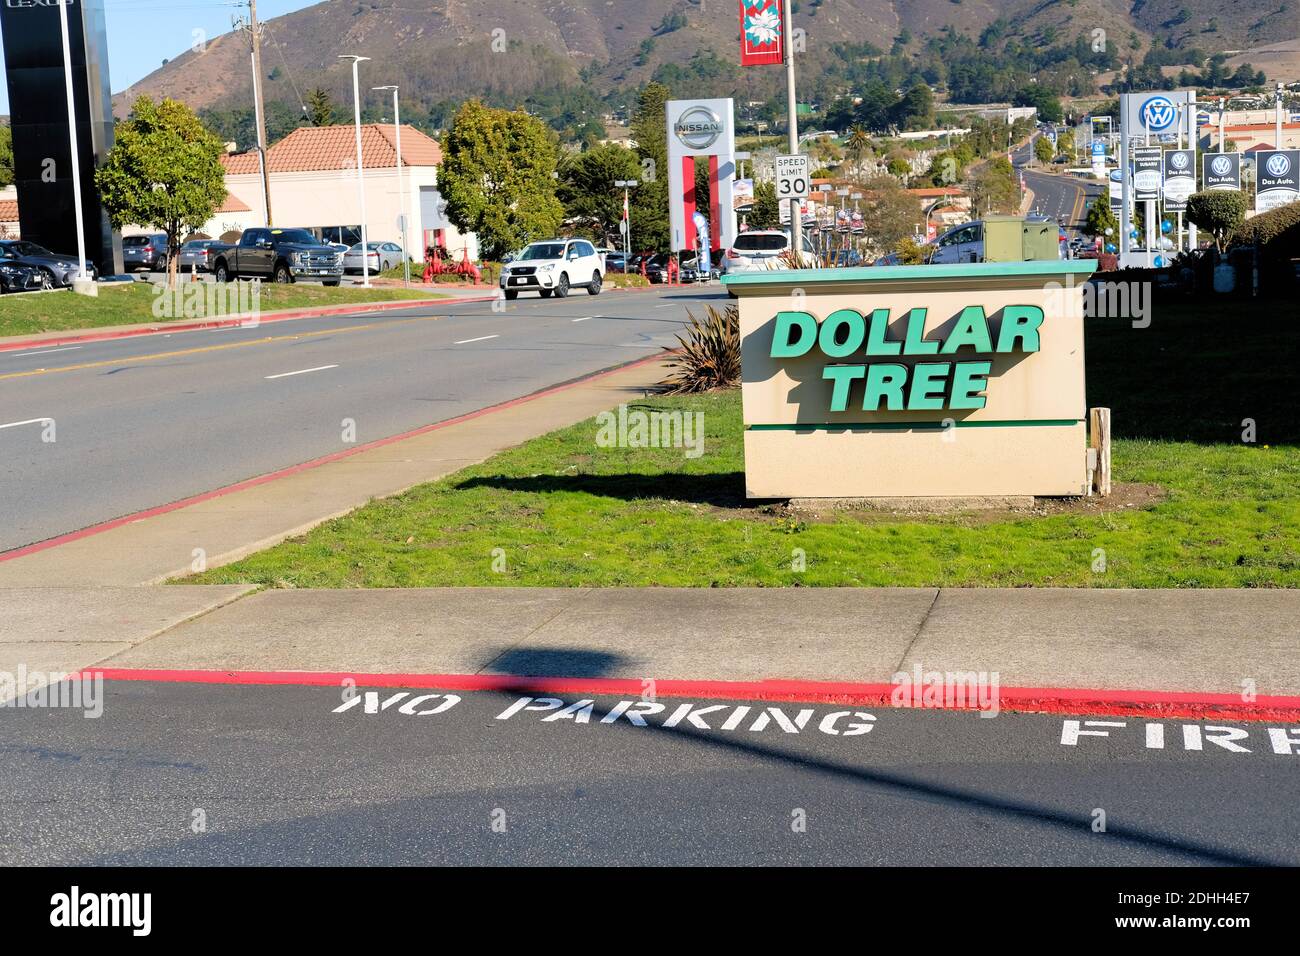 Dollar Tree store sign at the entrance to its parking lot with a view of the street in Colma, California, USA. Stock Photo